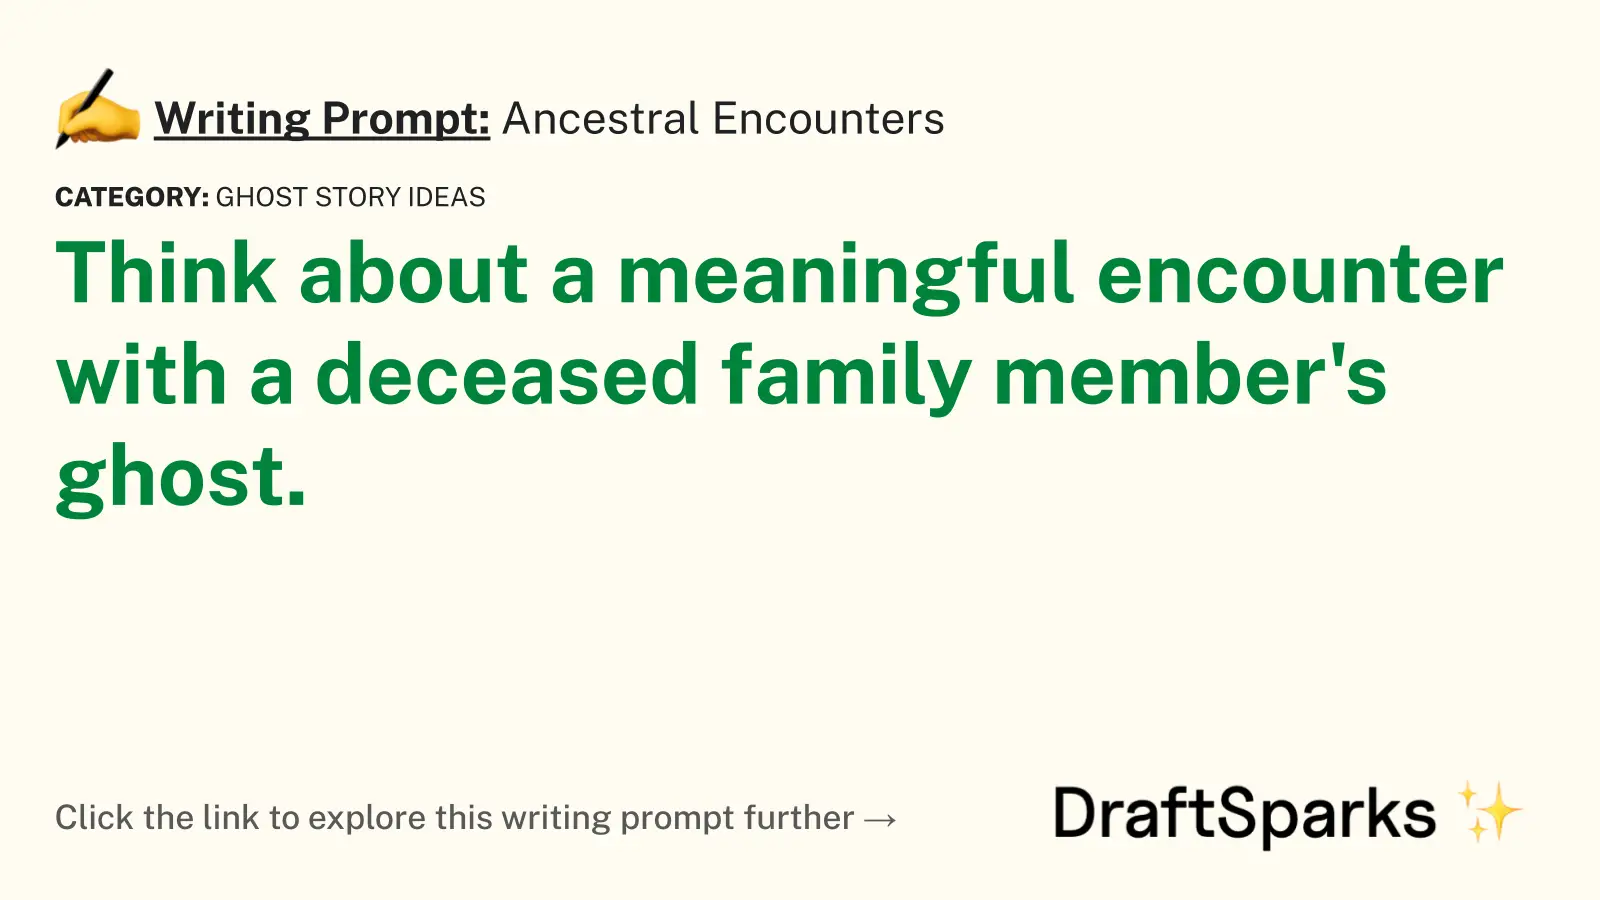 Ancestral Encounters